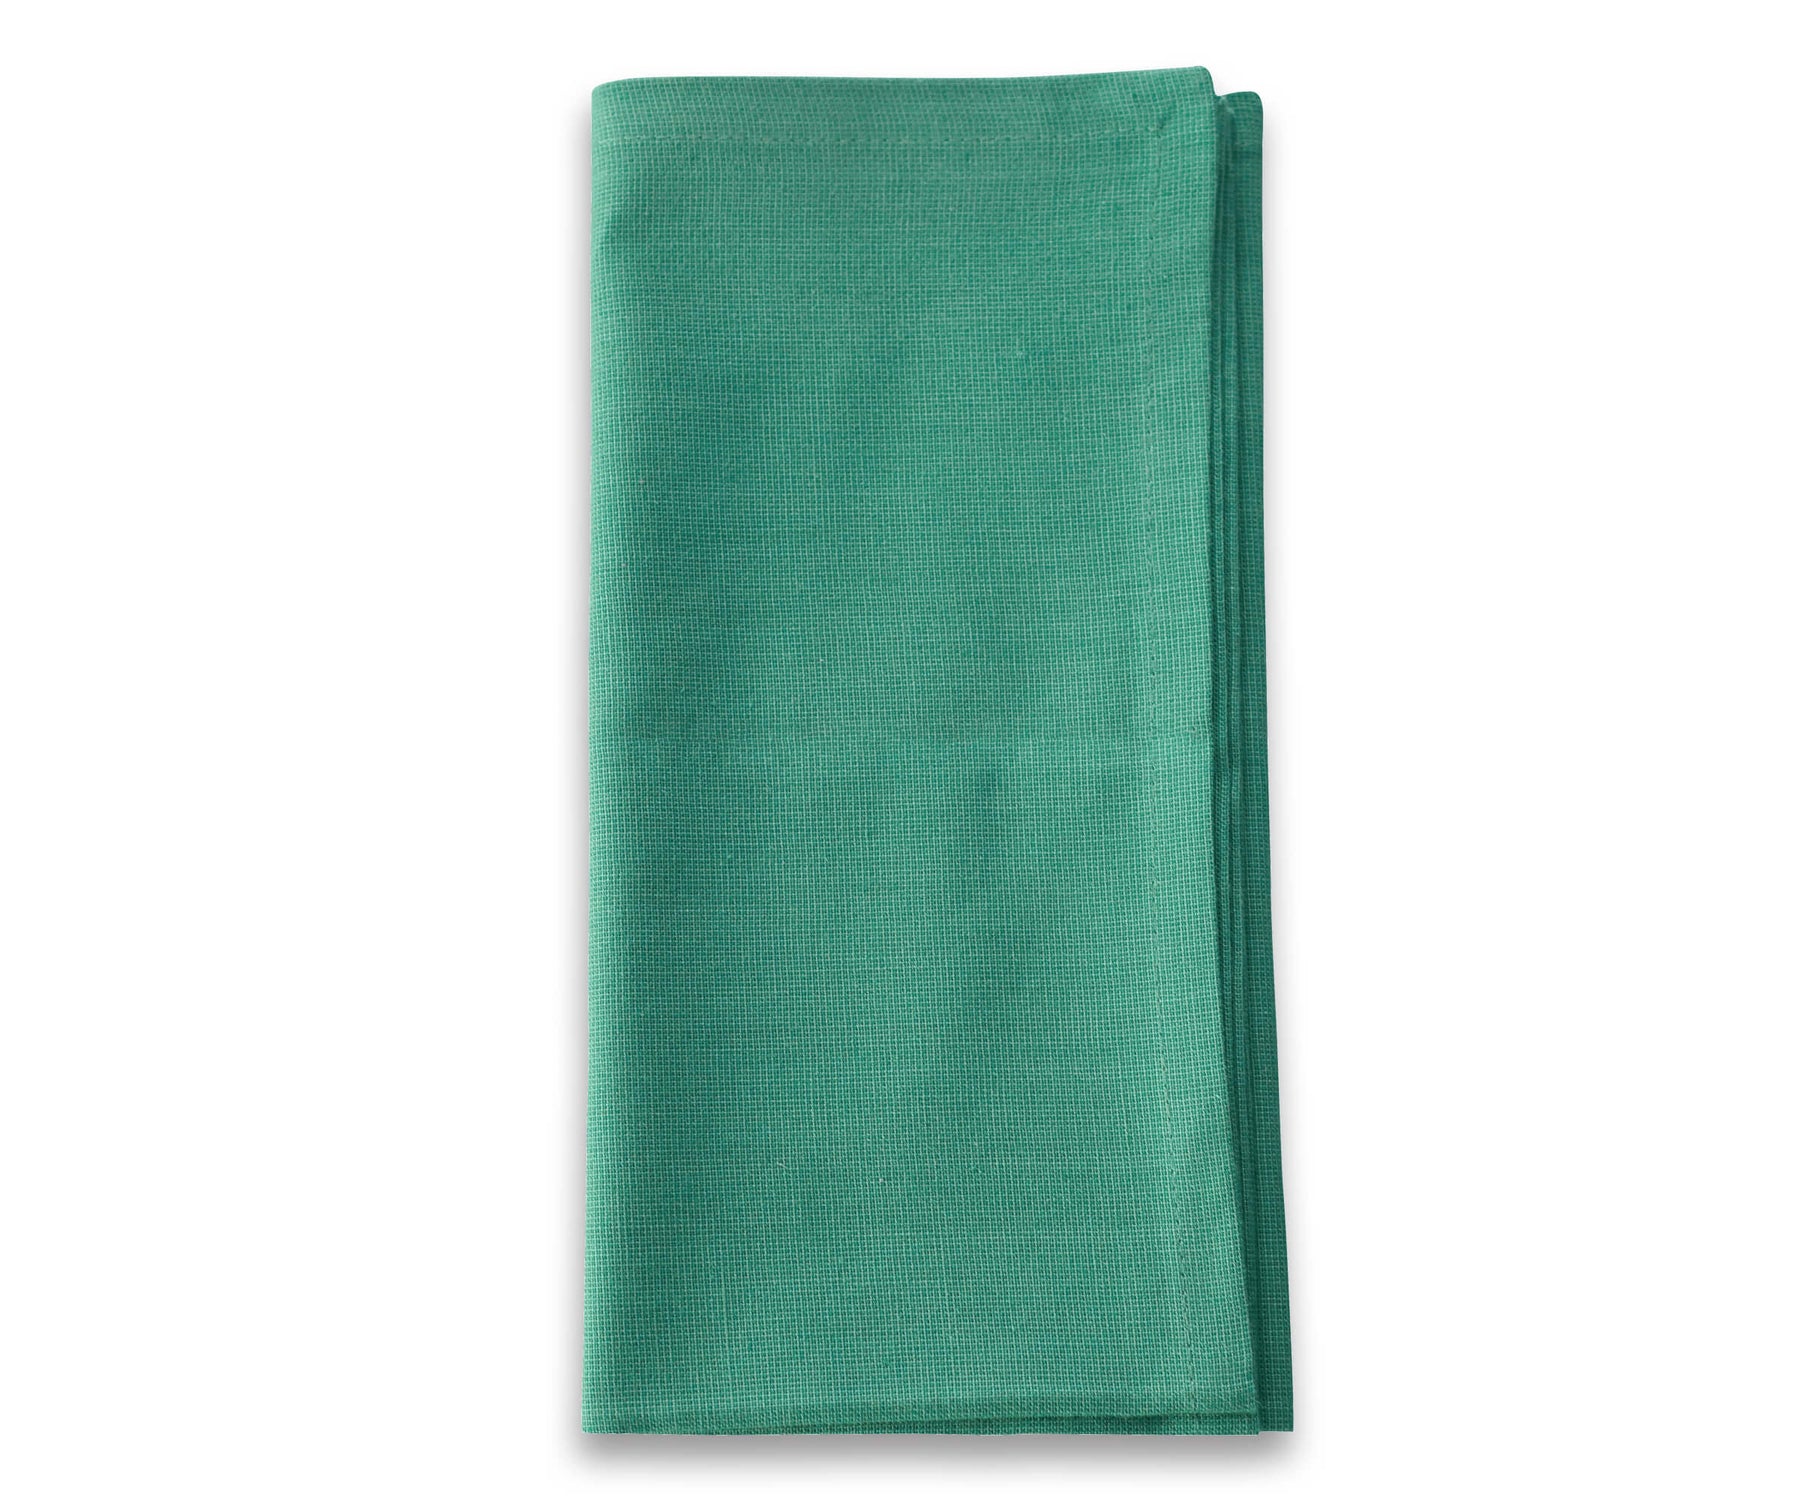 Teal colored dinner cloth napkins are placed with white background and the cotton dinner napkins are looks elegant.